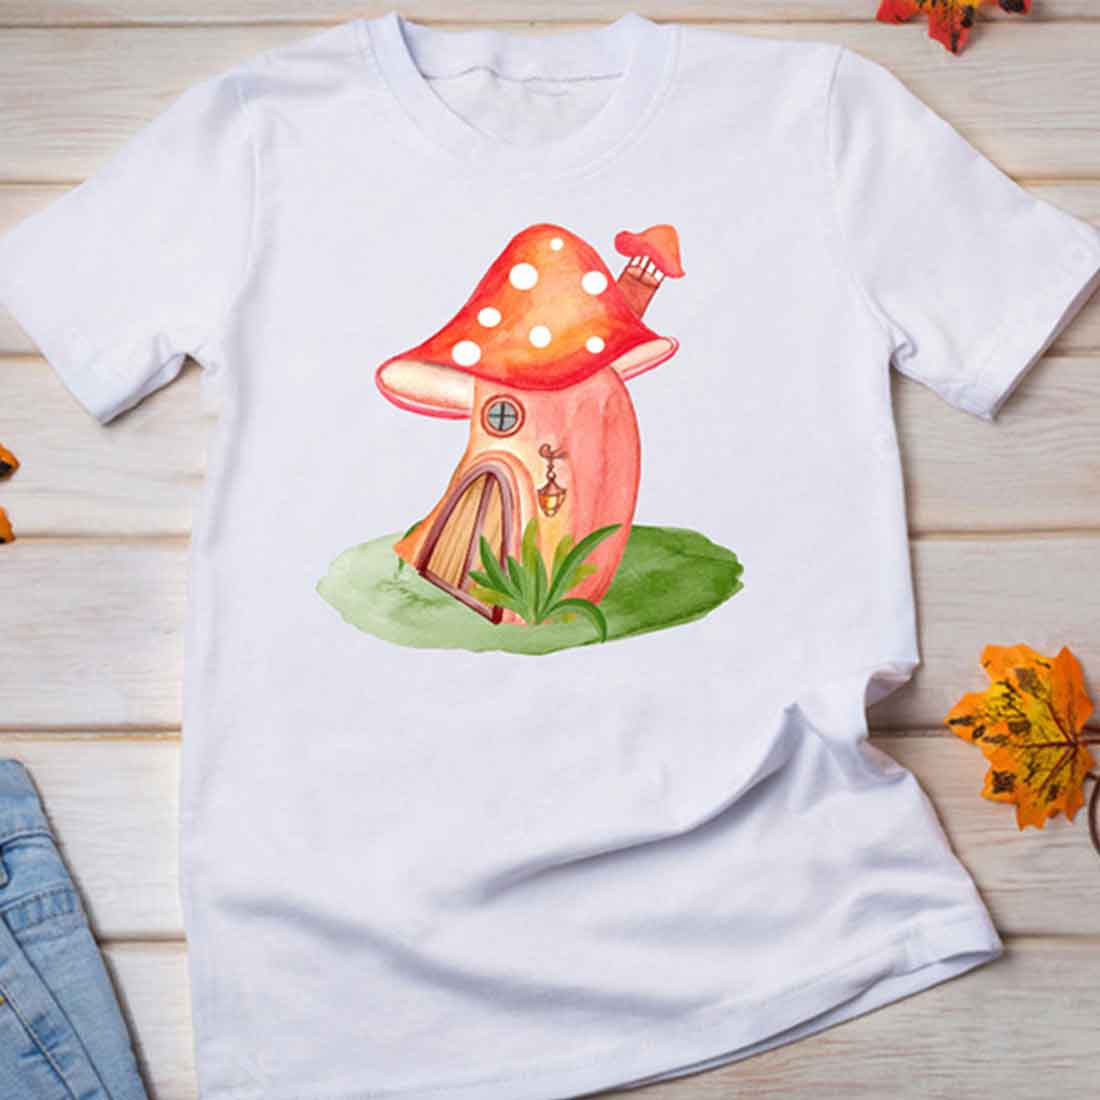 Image of a T-shirt with a unique print of the gnome house